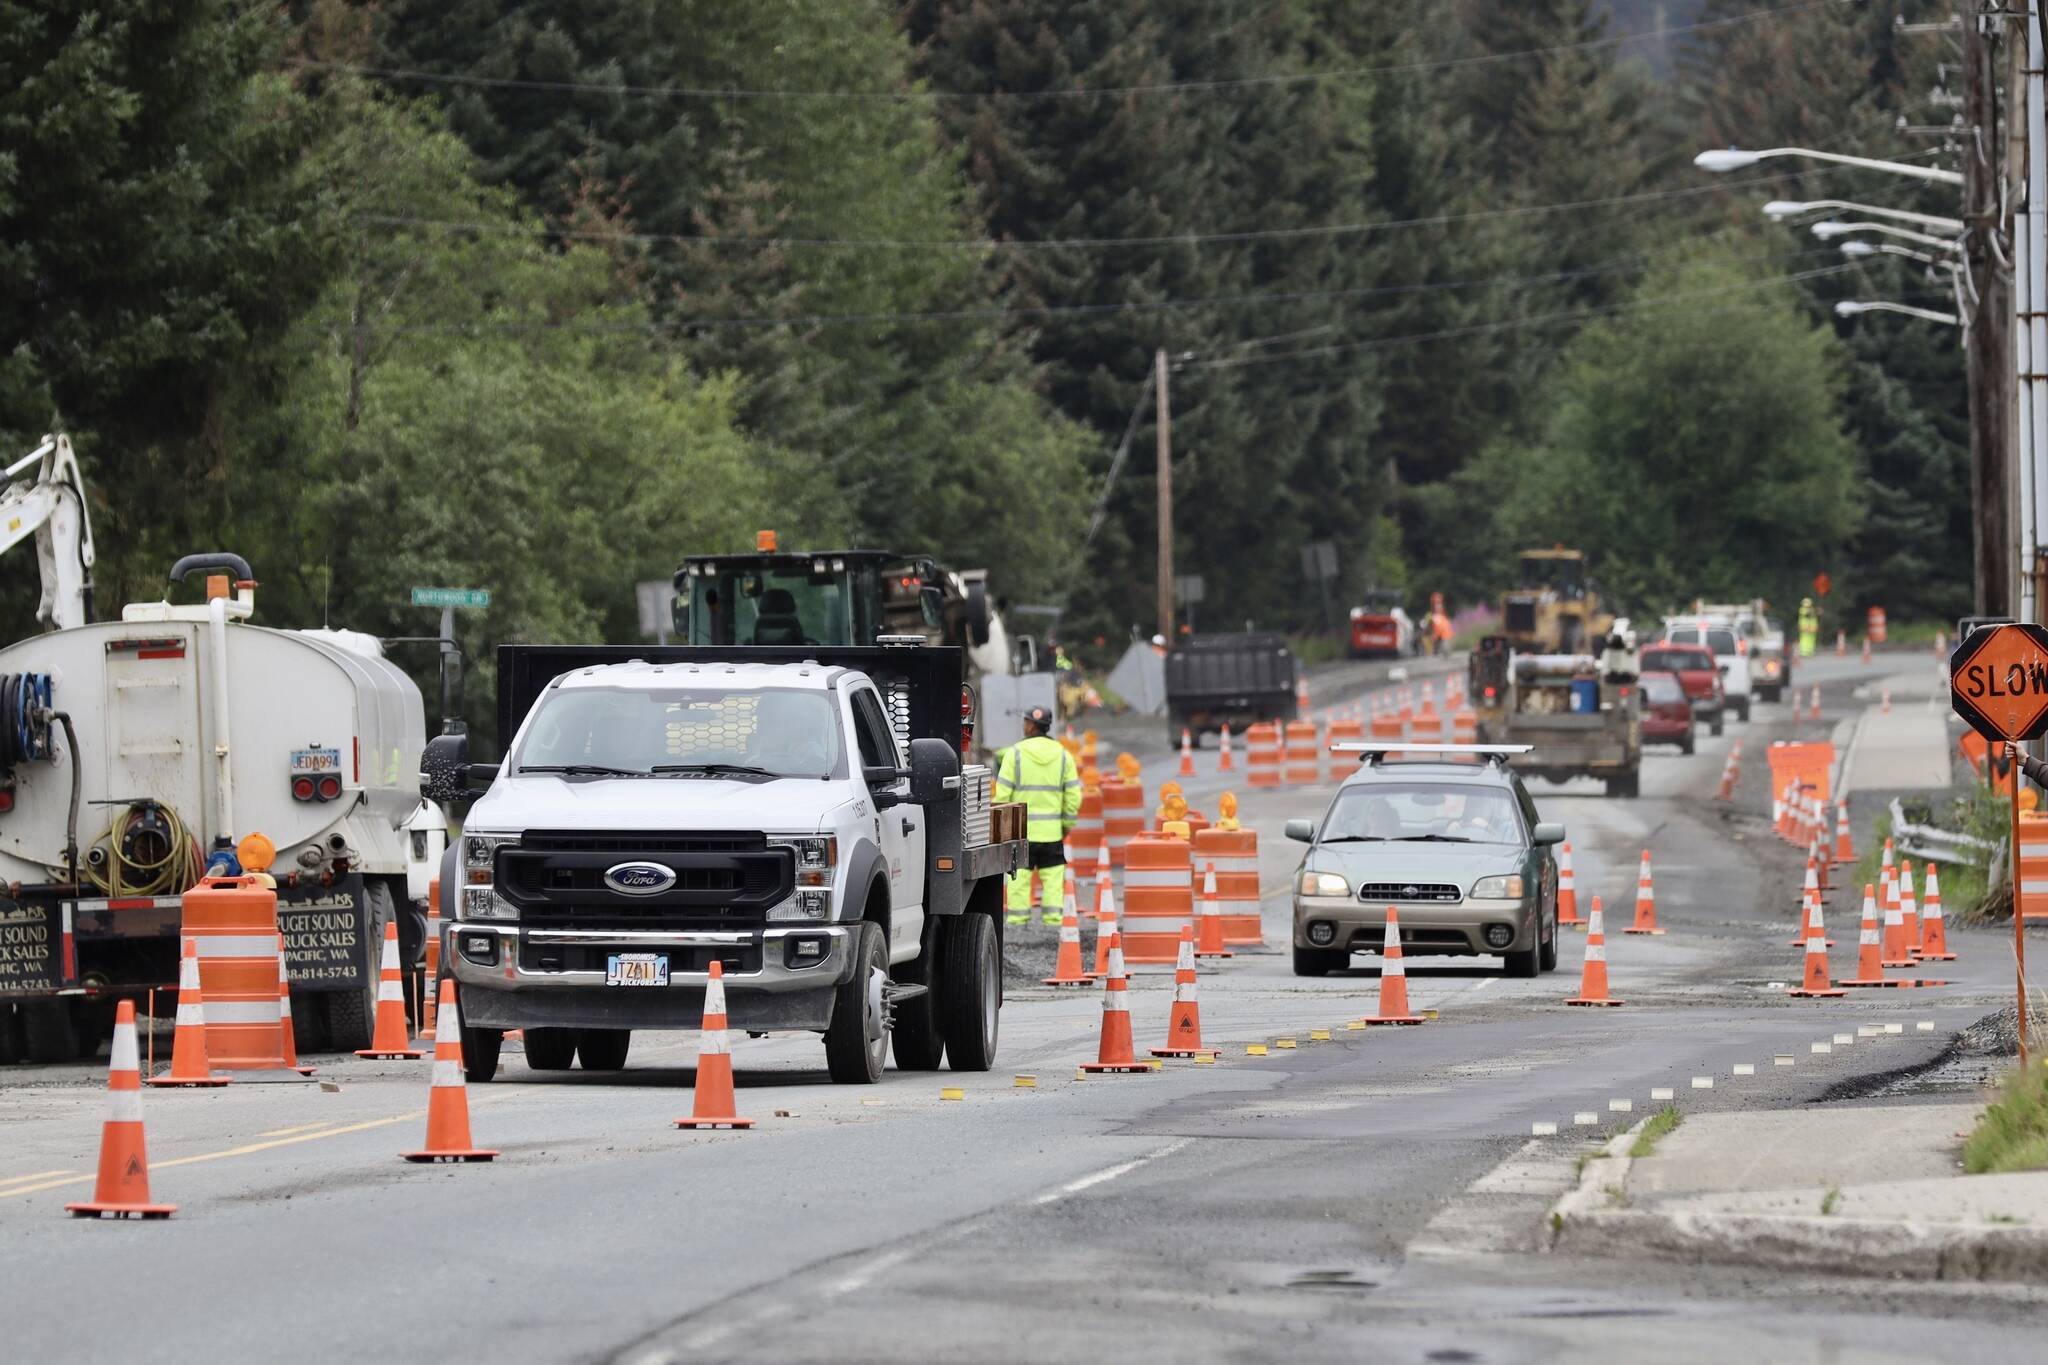 Construction on Glacier Highway in the Lemon Creek area is scheduled to finish on schedule, said a Department of Transportation and Public Facilities spokesperson. (Michael S. Lockett / Juneau Empire)